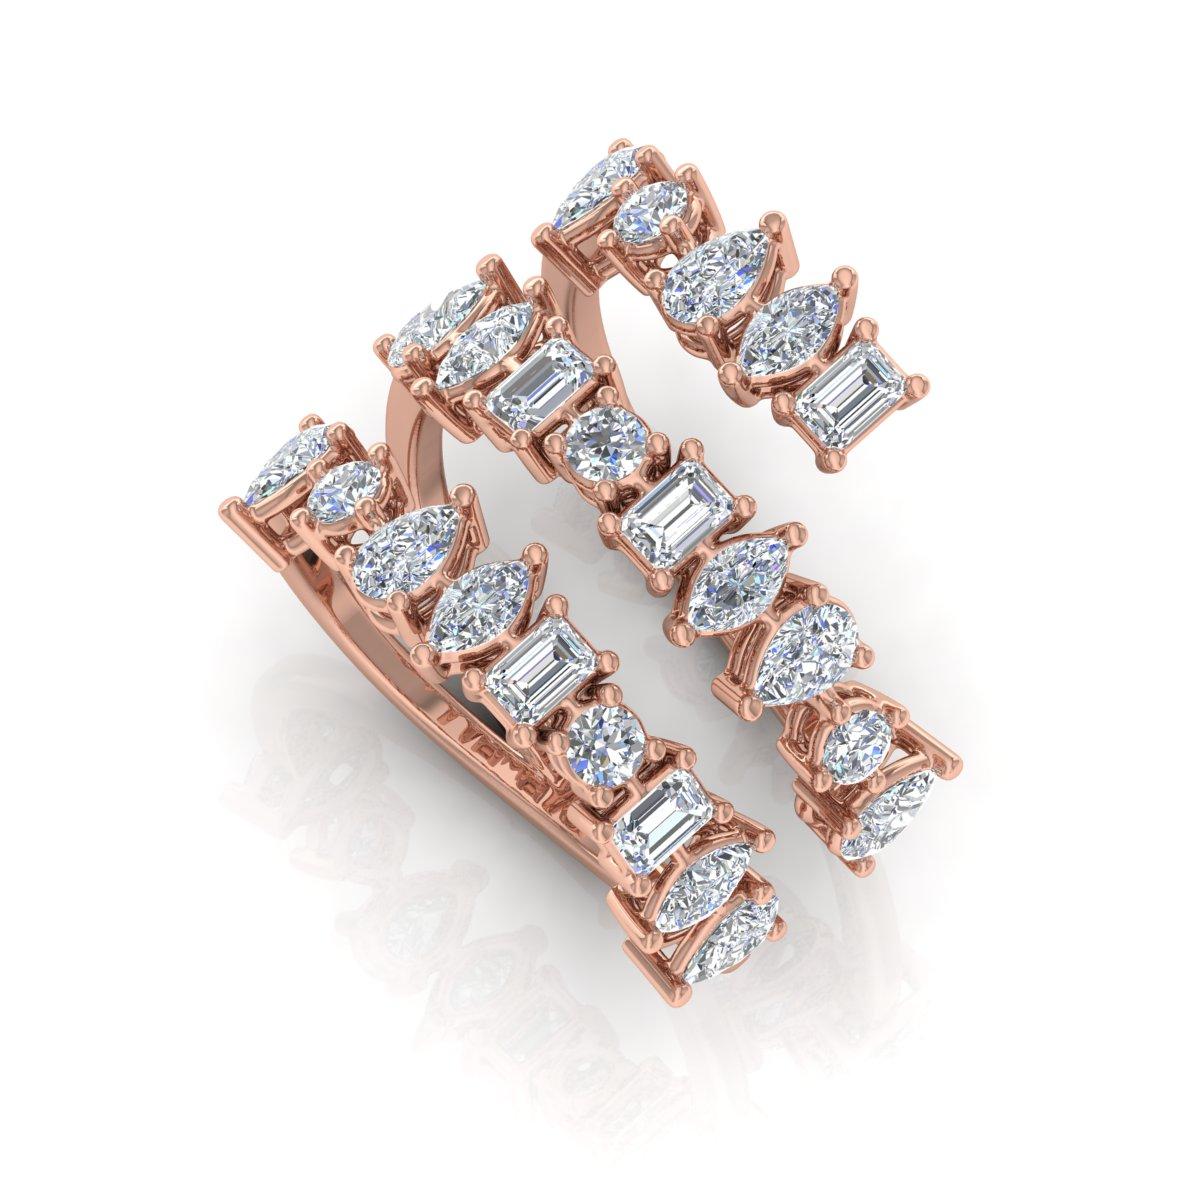 For Sale:  2.70 Carat Pear Baguette Diamond Wrap Ring Solid 18k Rose Gold Handmade Jewelry 7